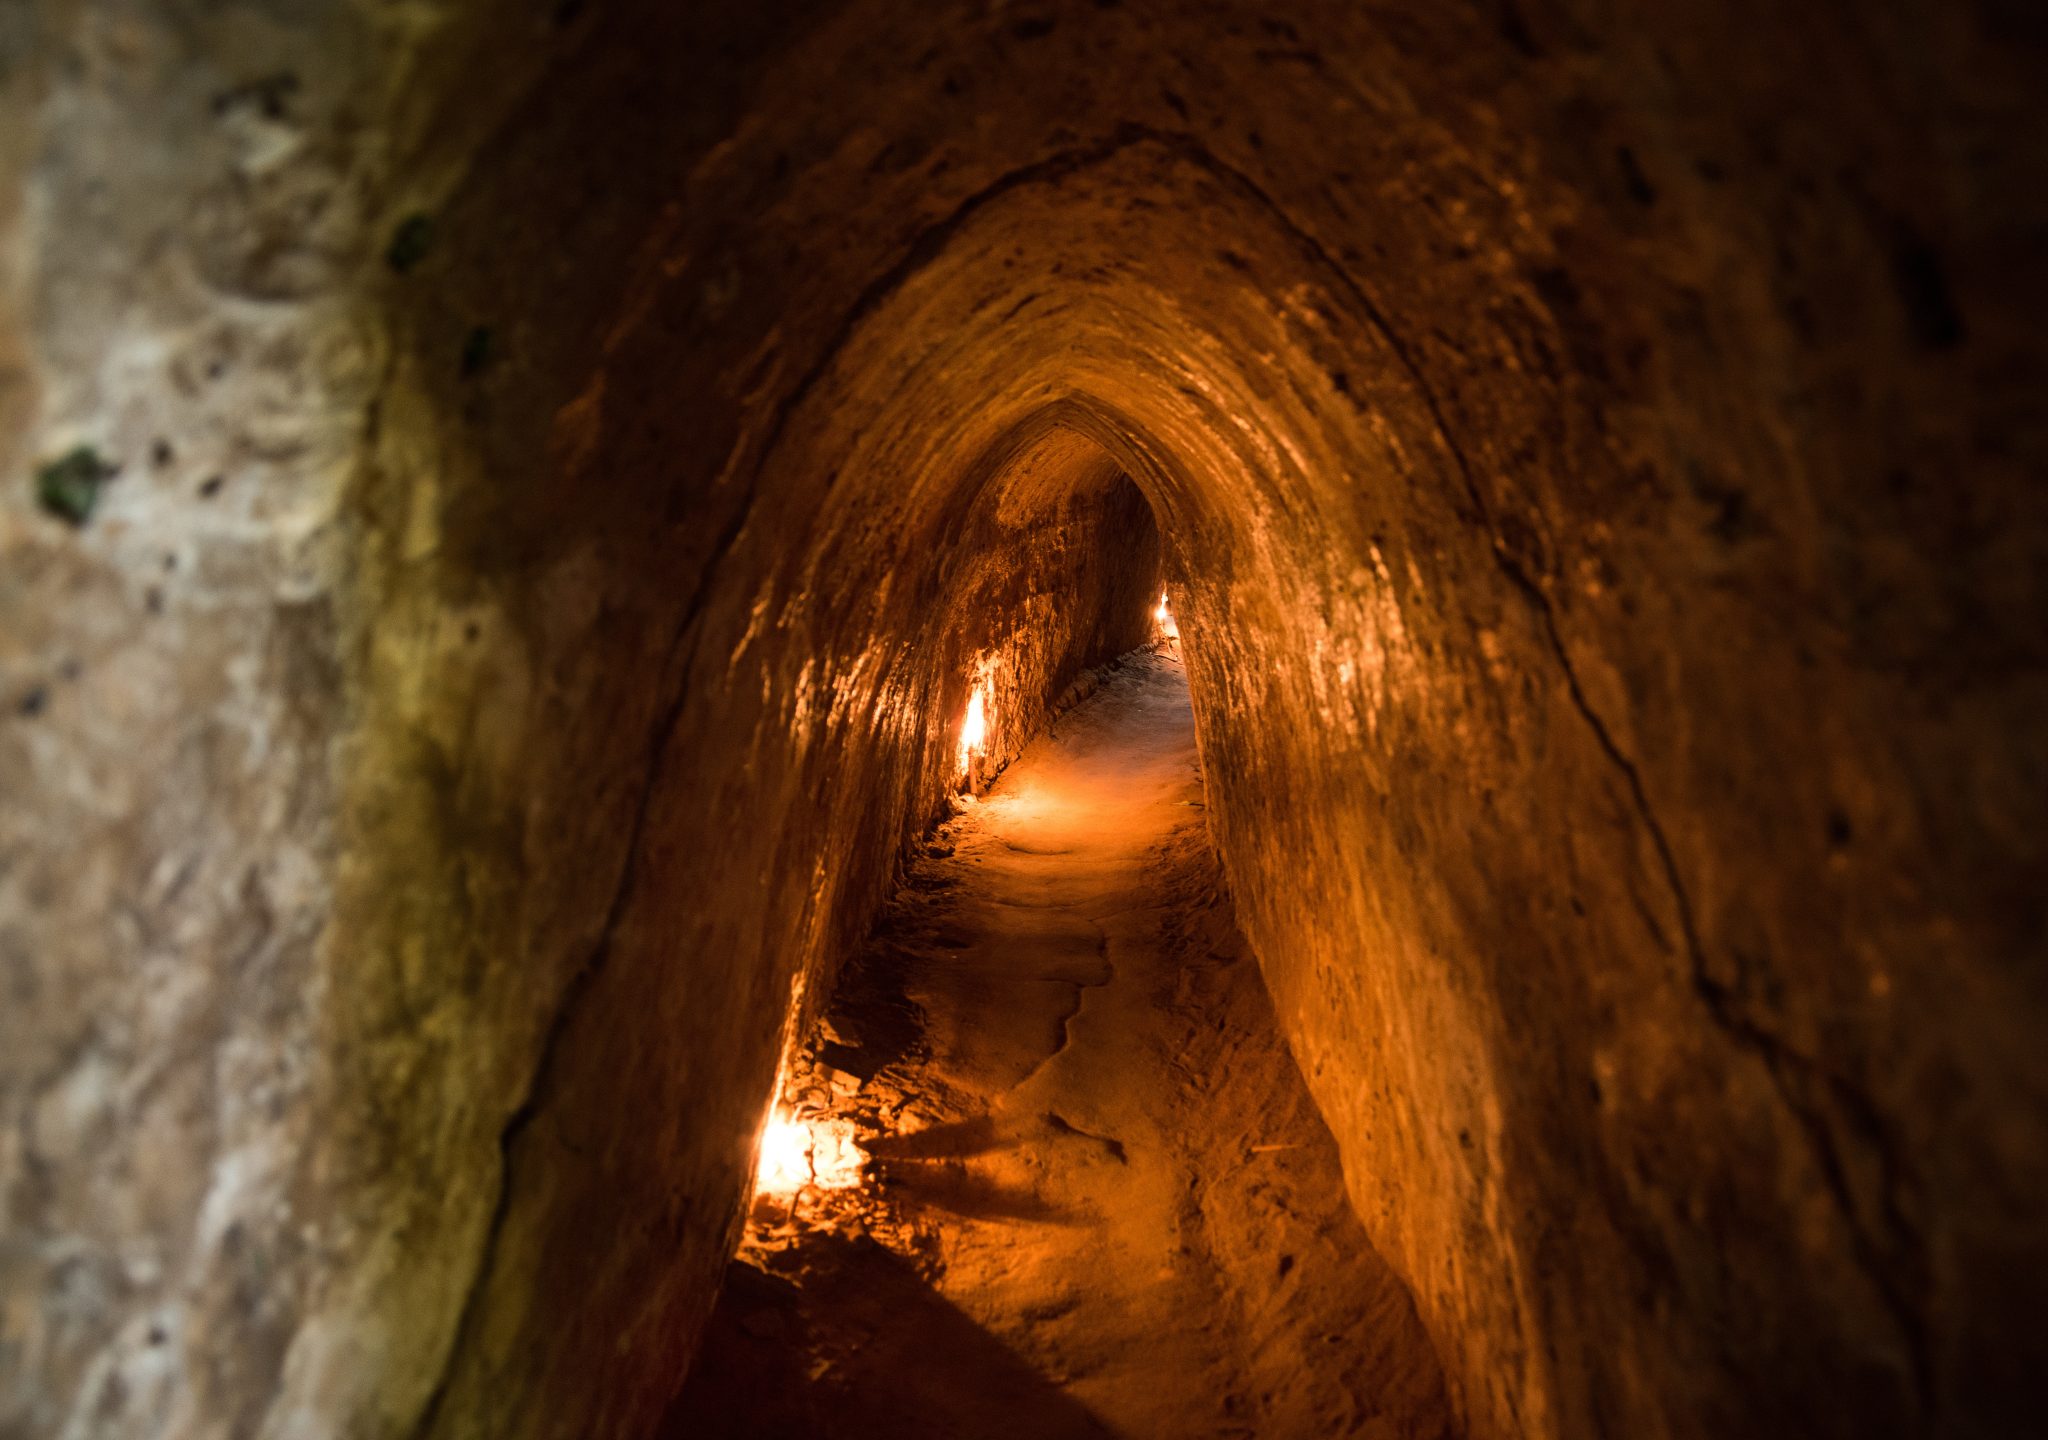 Short Guide to Vietnam’s Cu Chi Tunnels